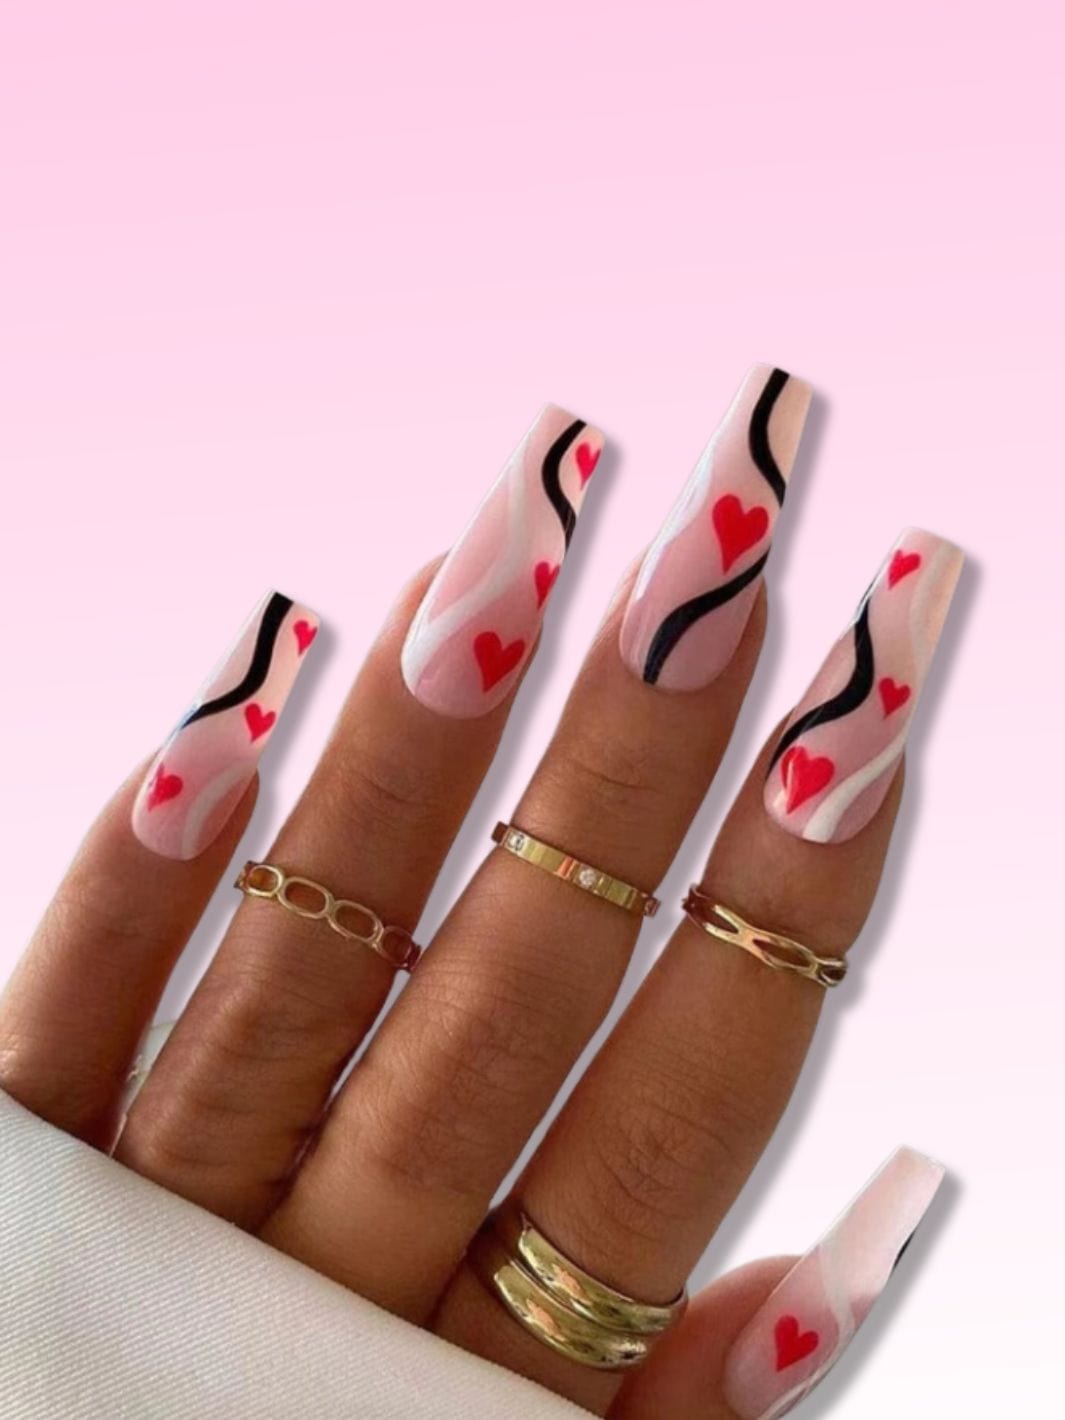 Faux ongles coeur Nail Chic